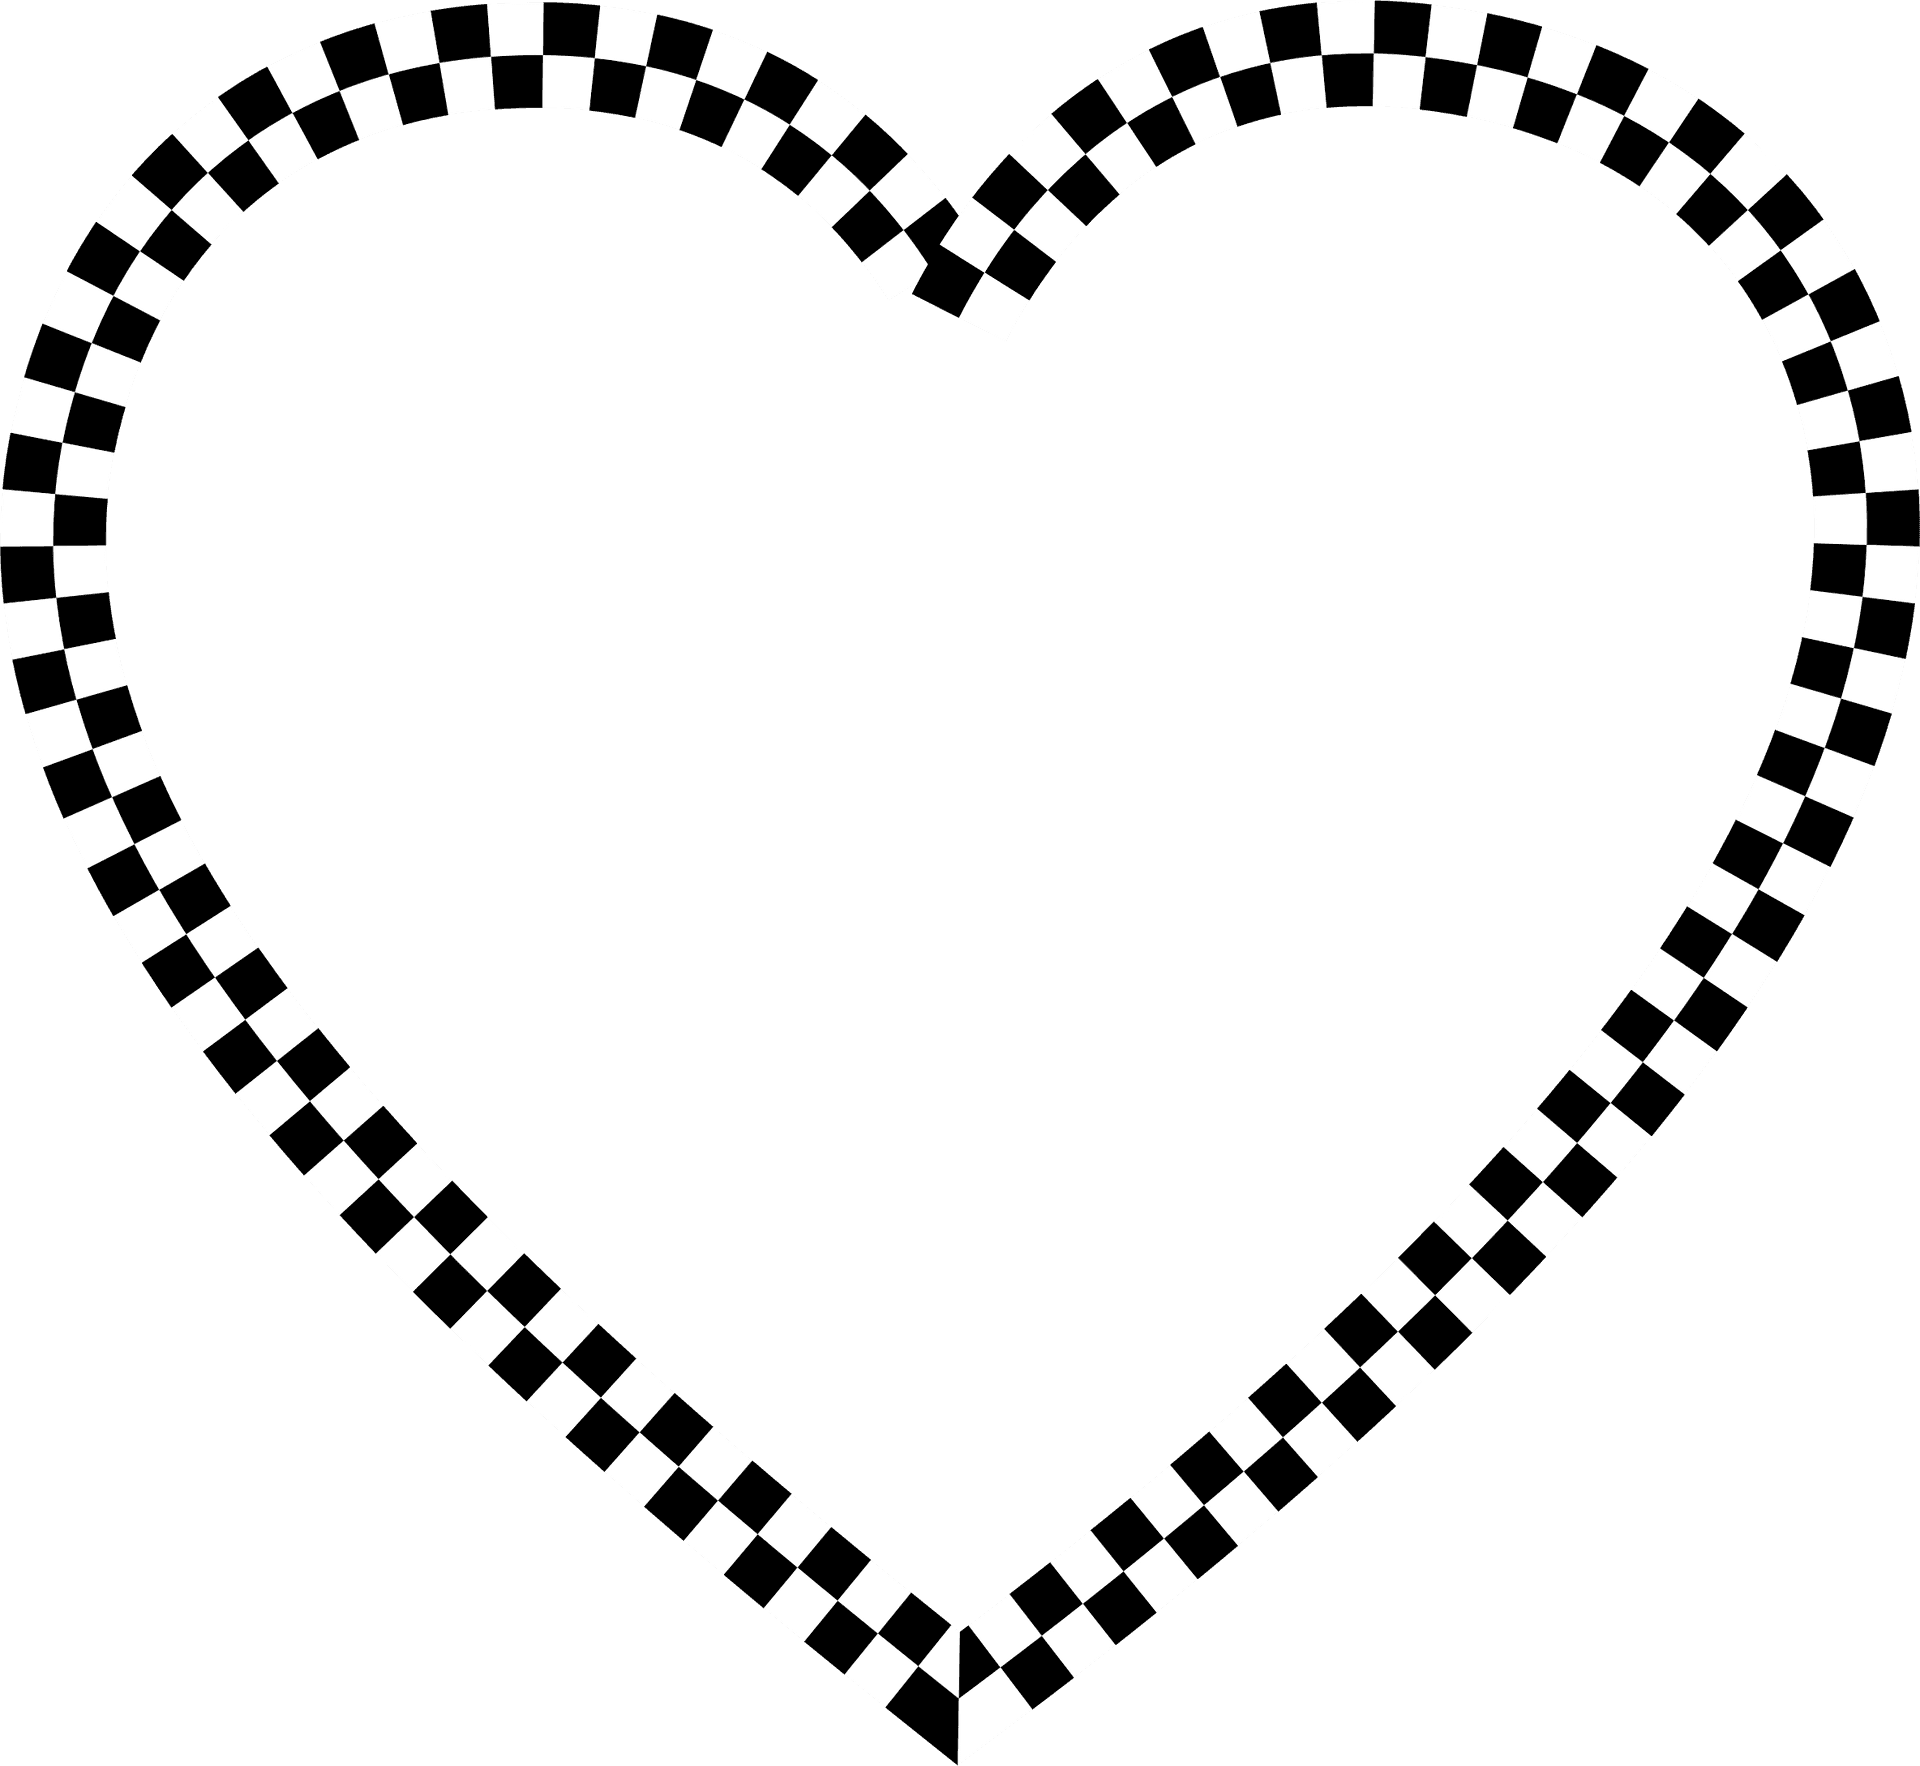 Checkered Heart Graphic PNG